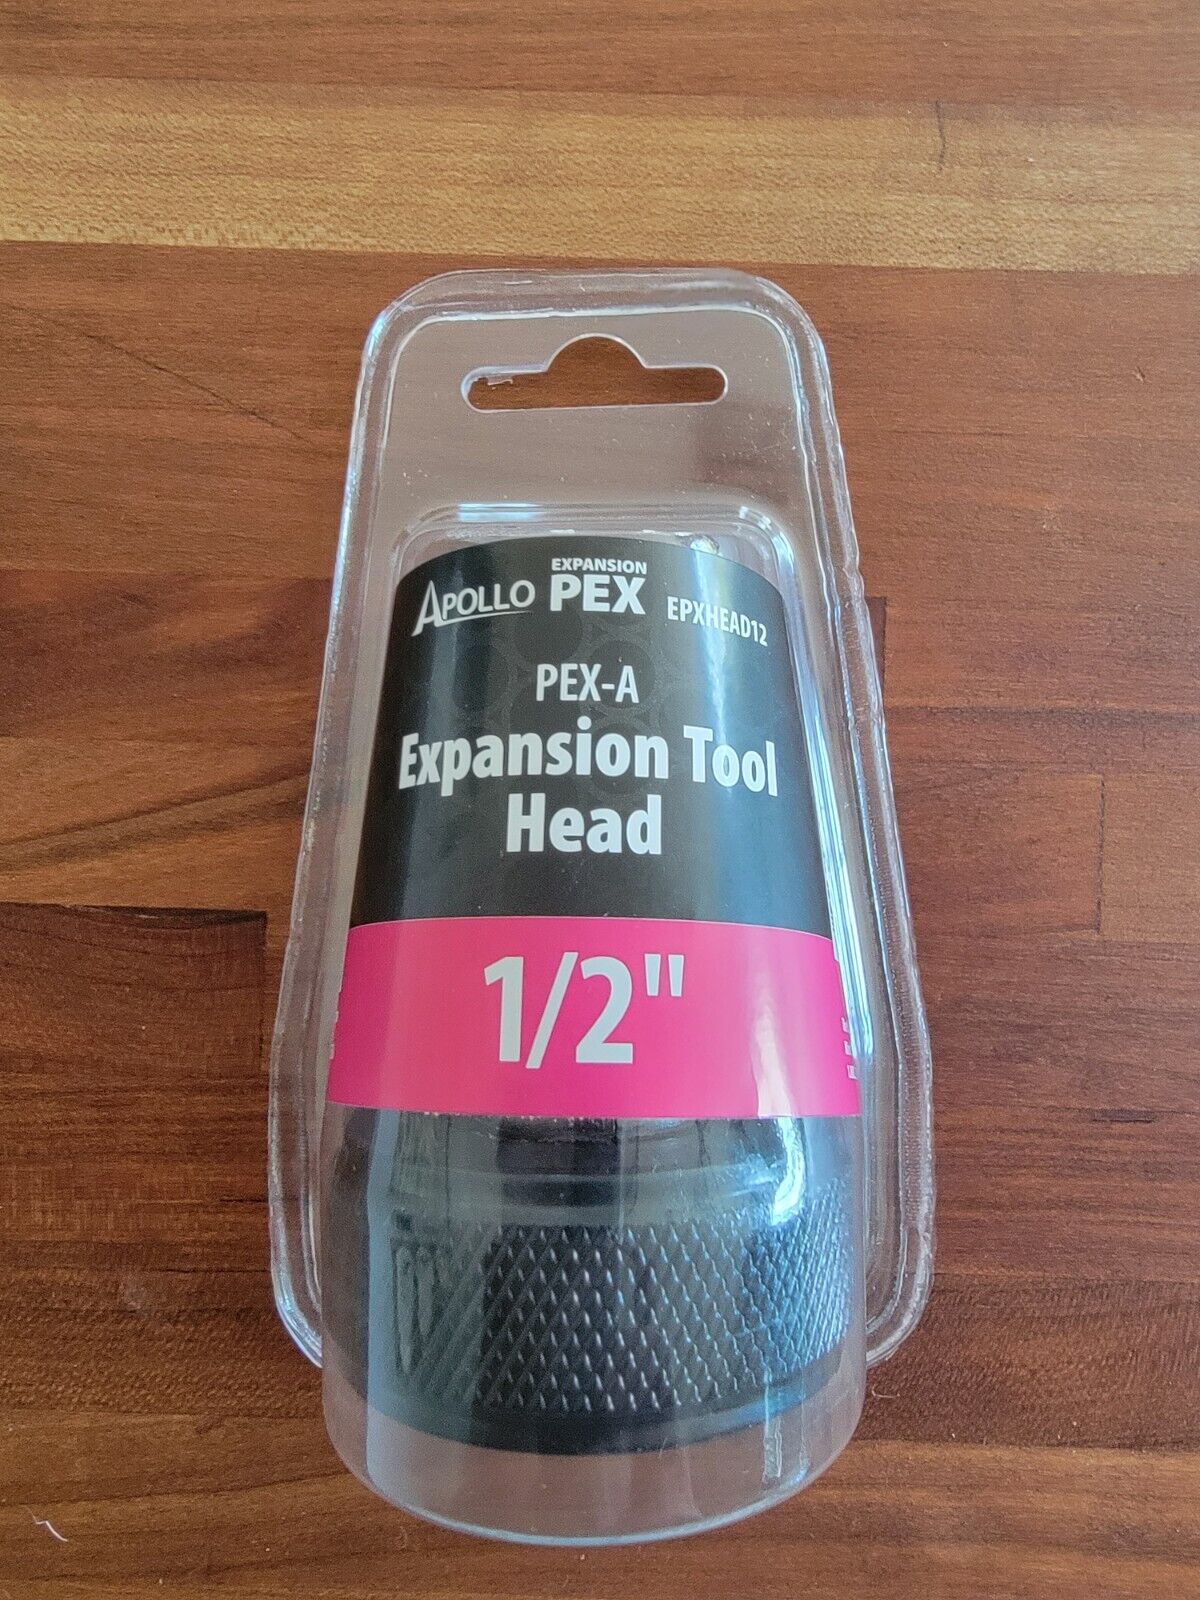 Apollo Epxhead12 Brass Expander Head For Expansion Pex Tool 1/2 In.